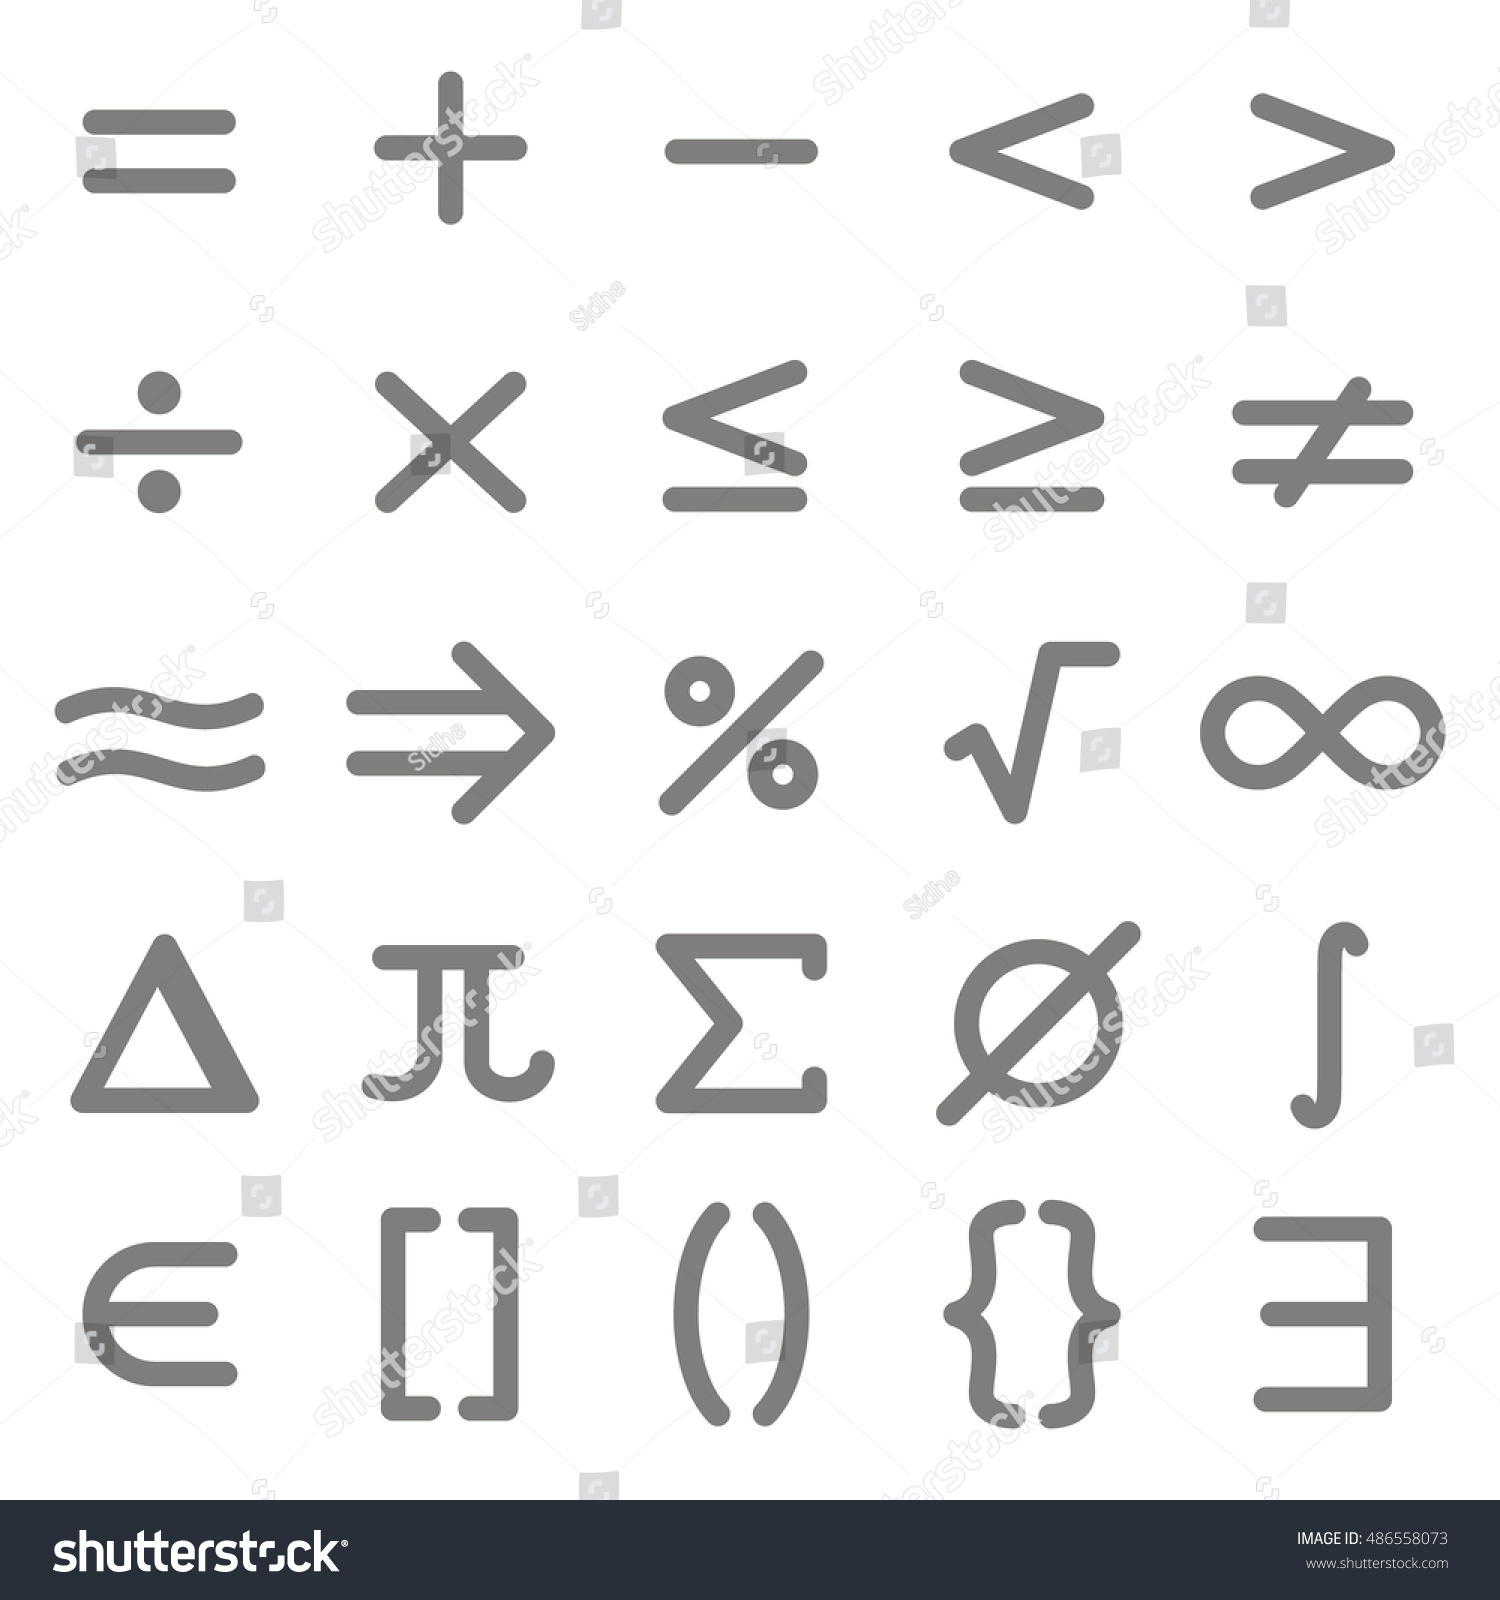 Set of monochrome icons with mathematical symbols for your design #486558073